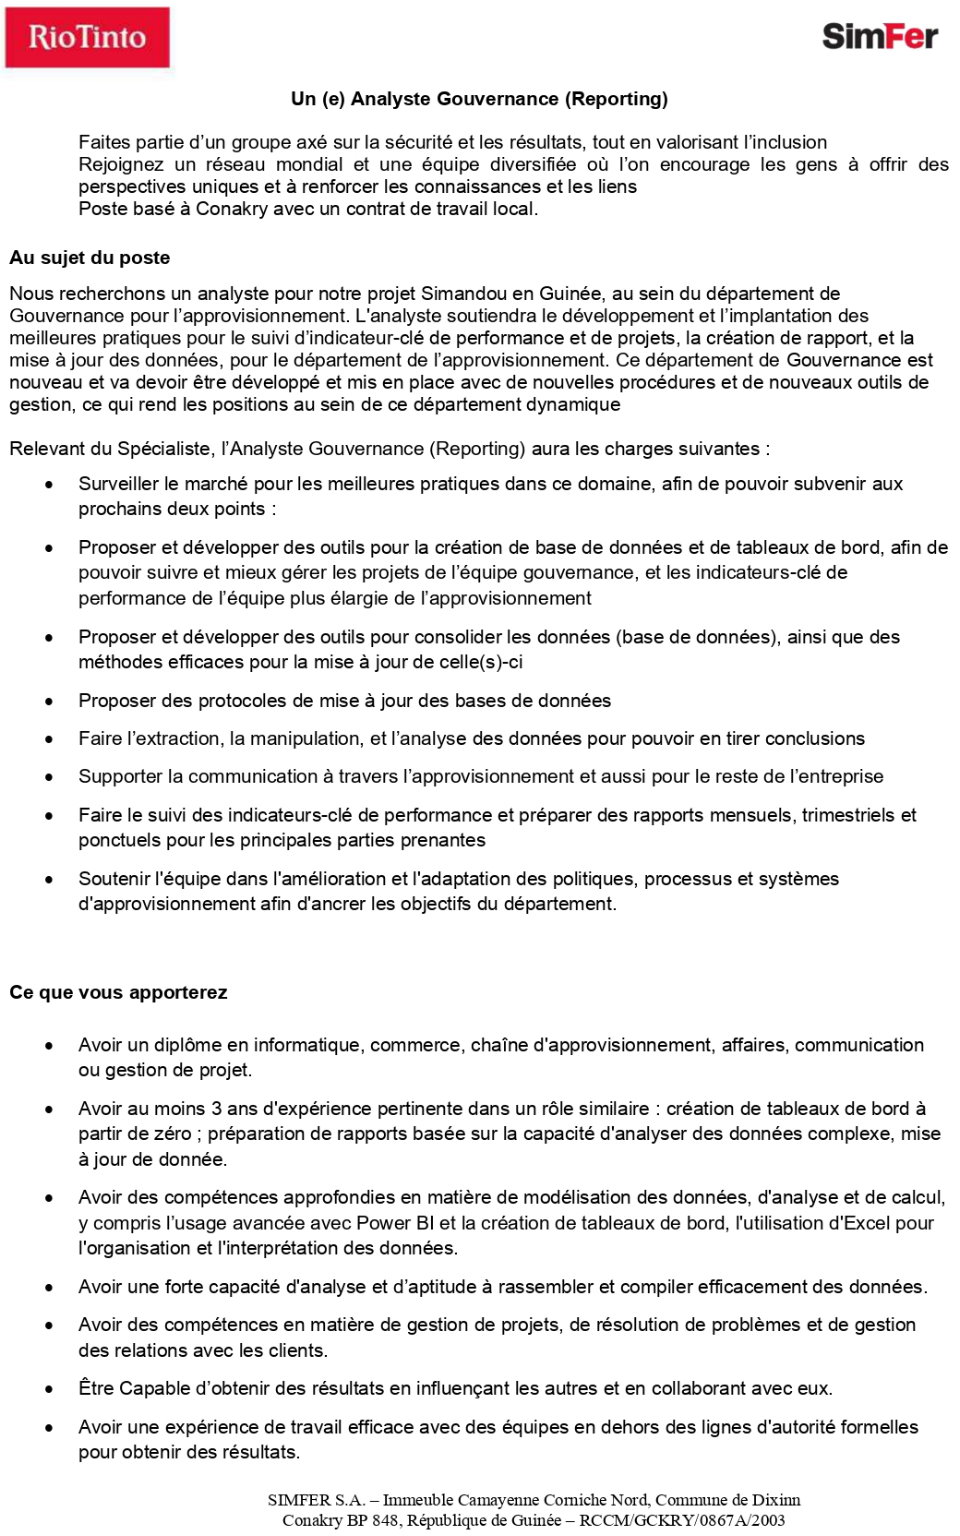 Un (e) Analyste Gouvernance (Reporting) | Page 1